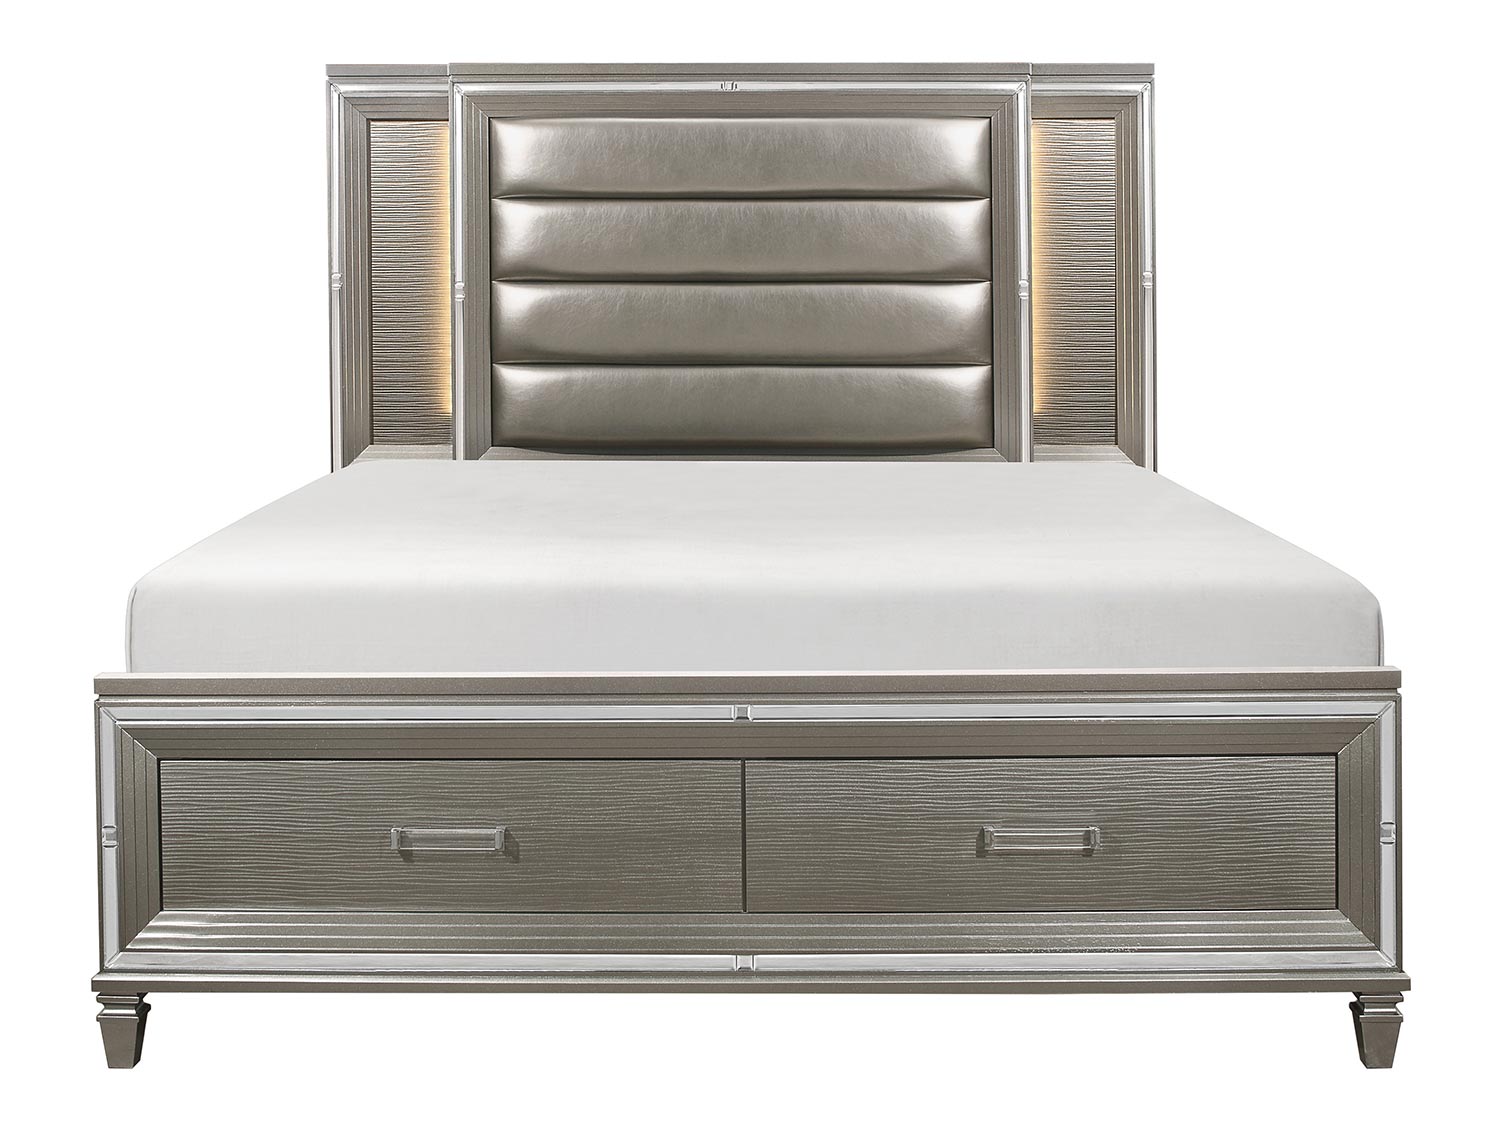 Homelegance Tamsin Platform Bed with Footboard Storage and LED Lighting - Silver-Gray Metallic